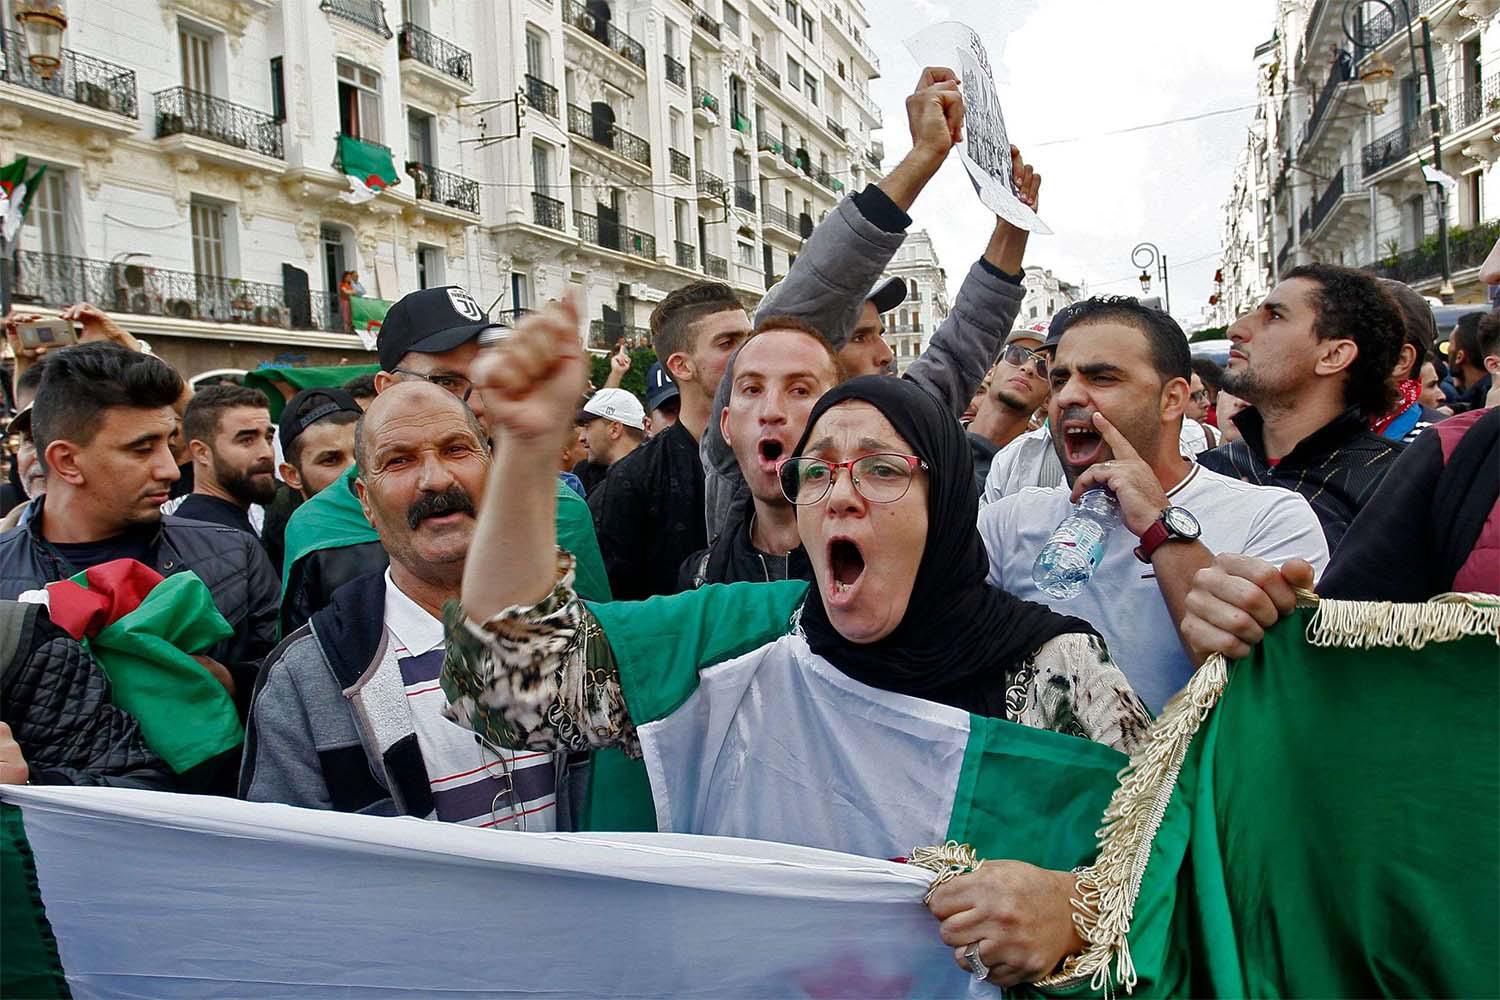 Algerian protesters chant slogans during the 37th consecutive Friday anti-government protests in Algiers